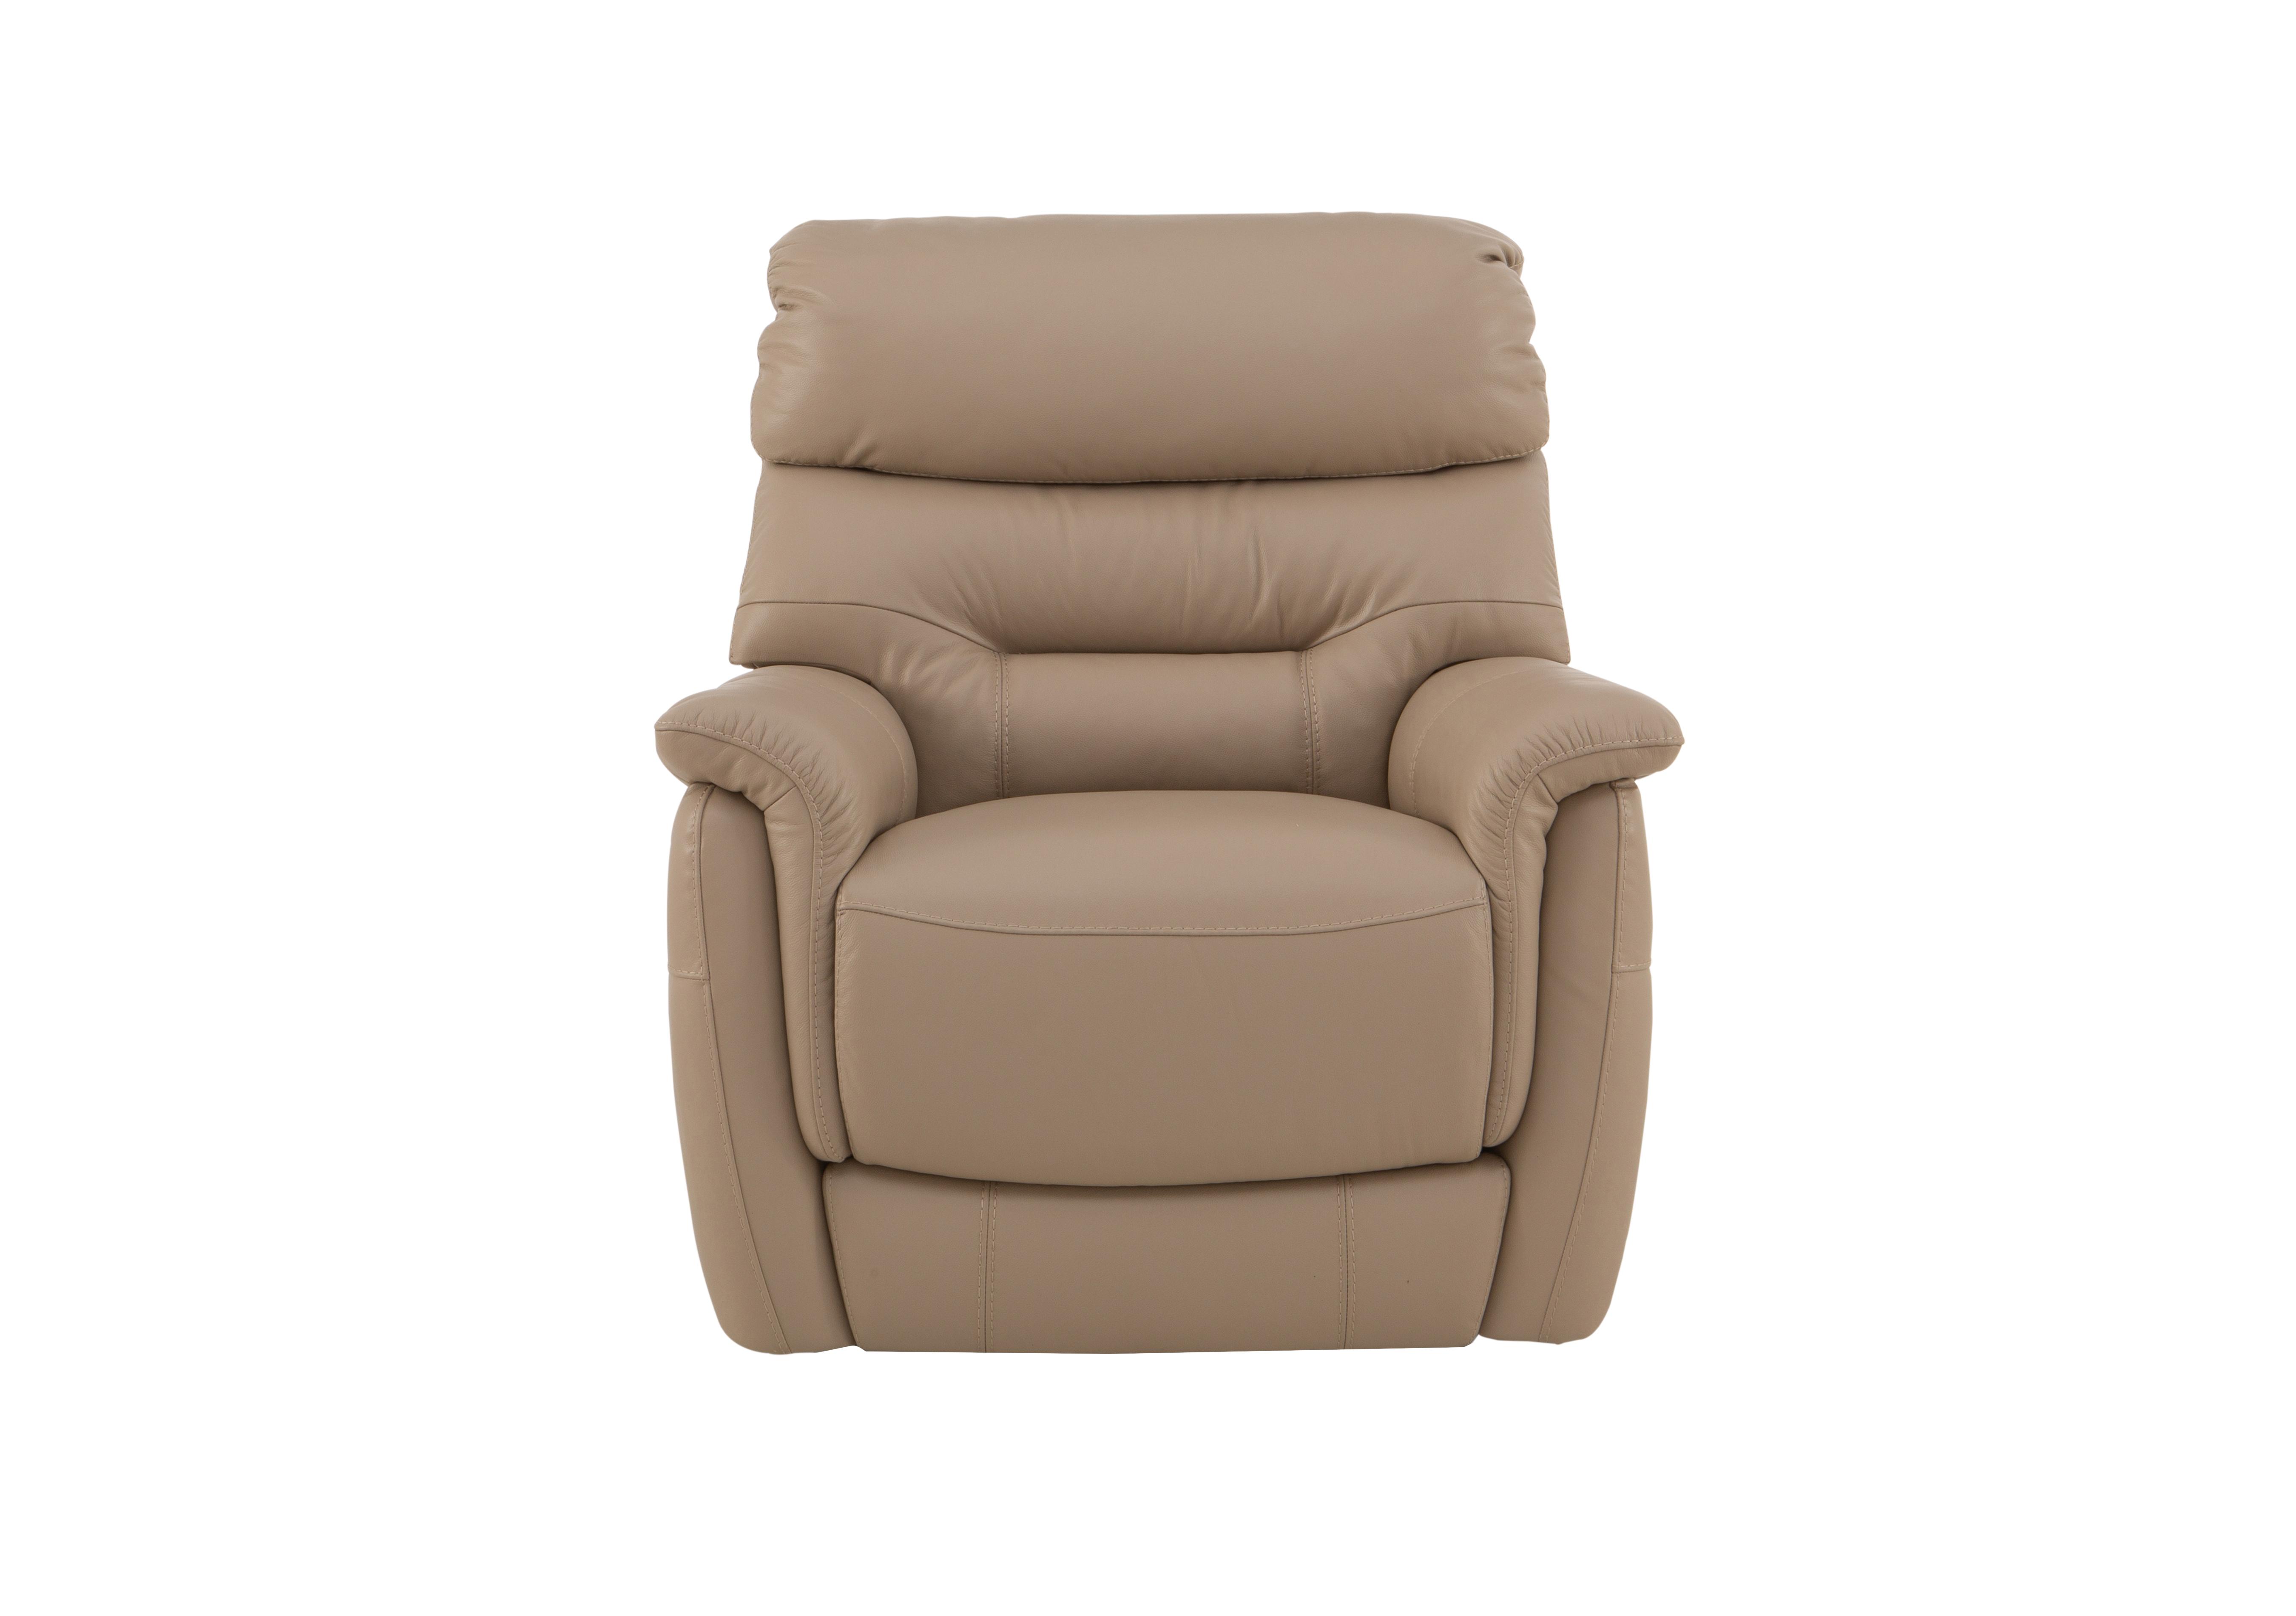 Chicago Leather Armchair in Nc-039c Pebble on Furniture Village